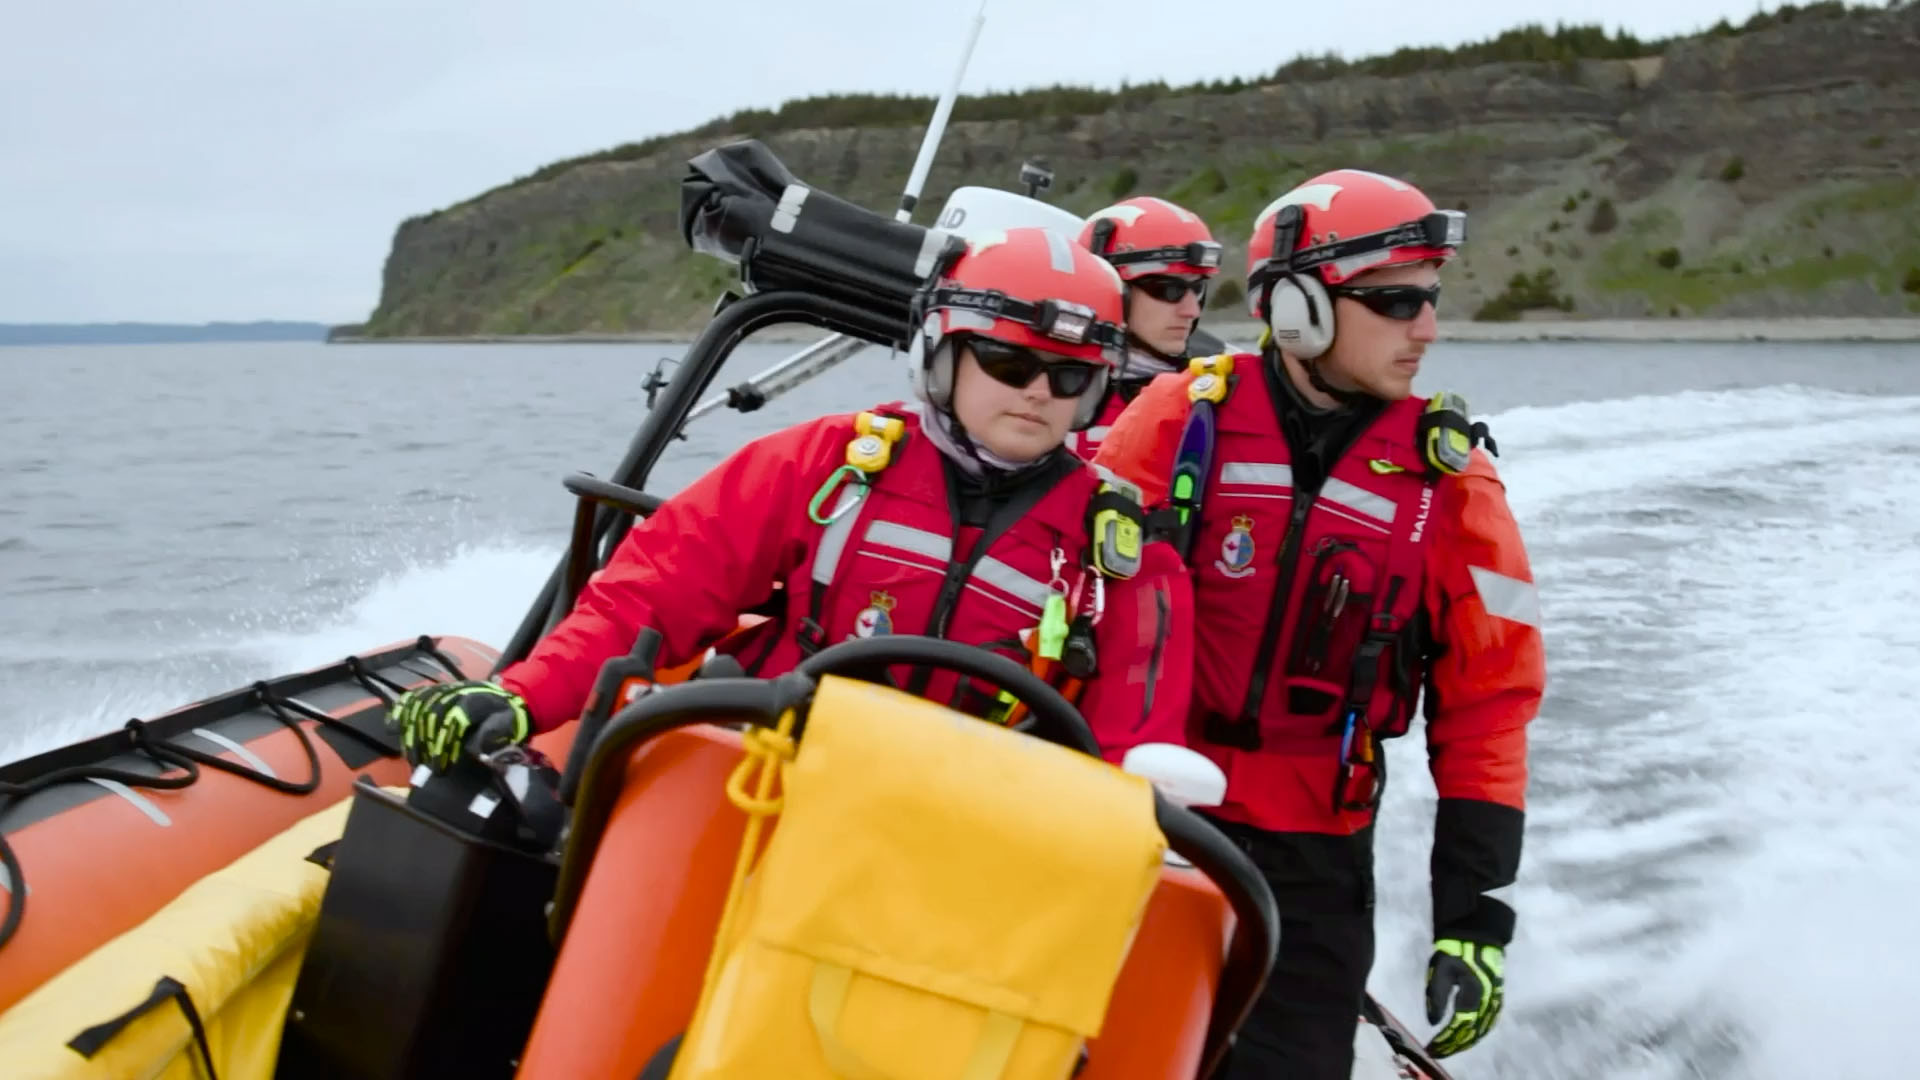 Video: Careers bringing you closer to Canada’s coasts and waterways